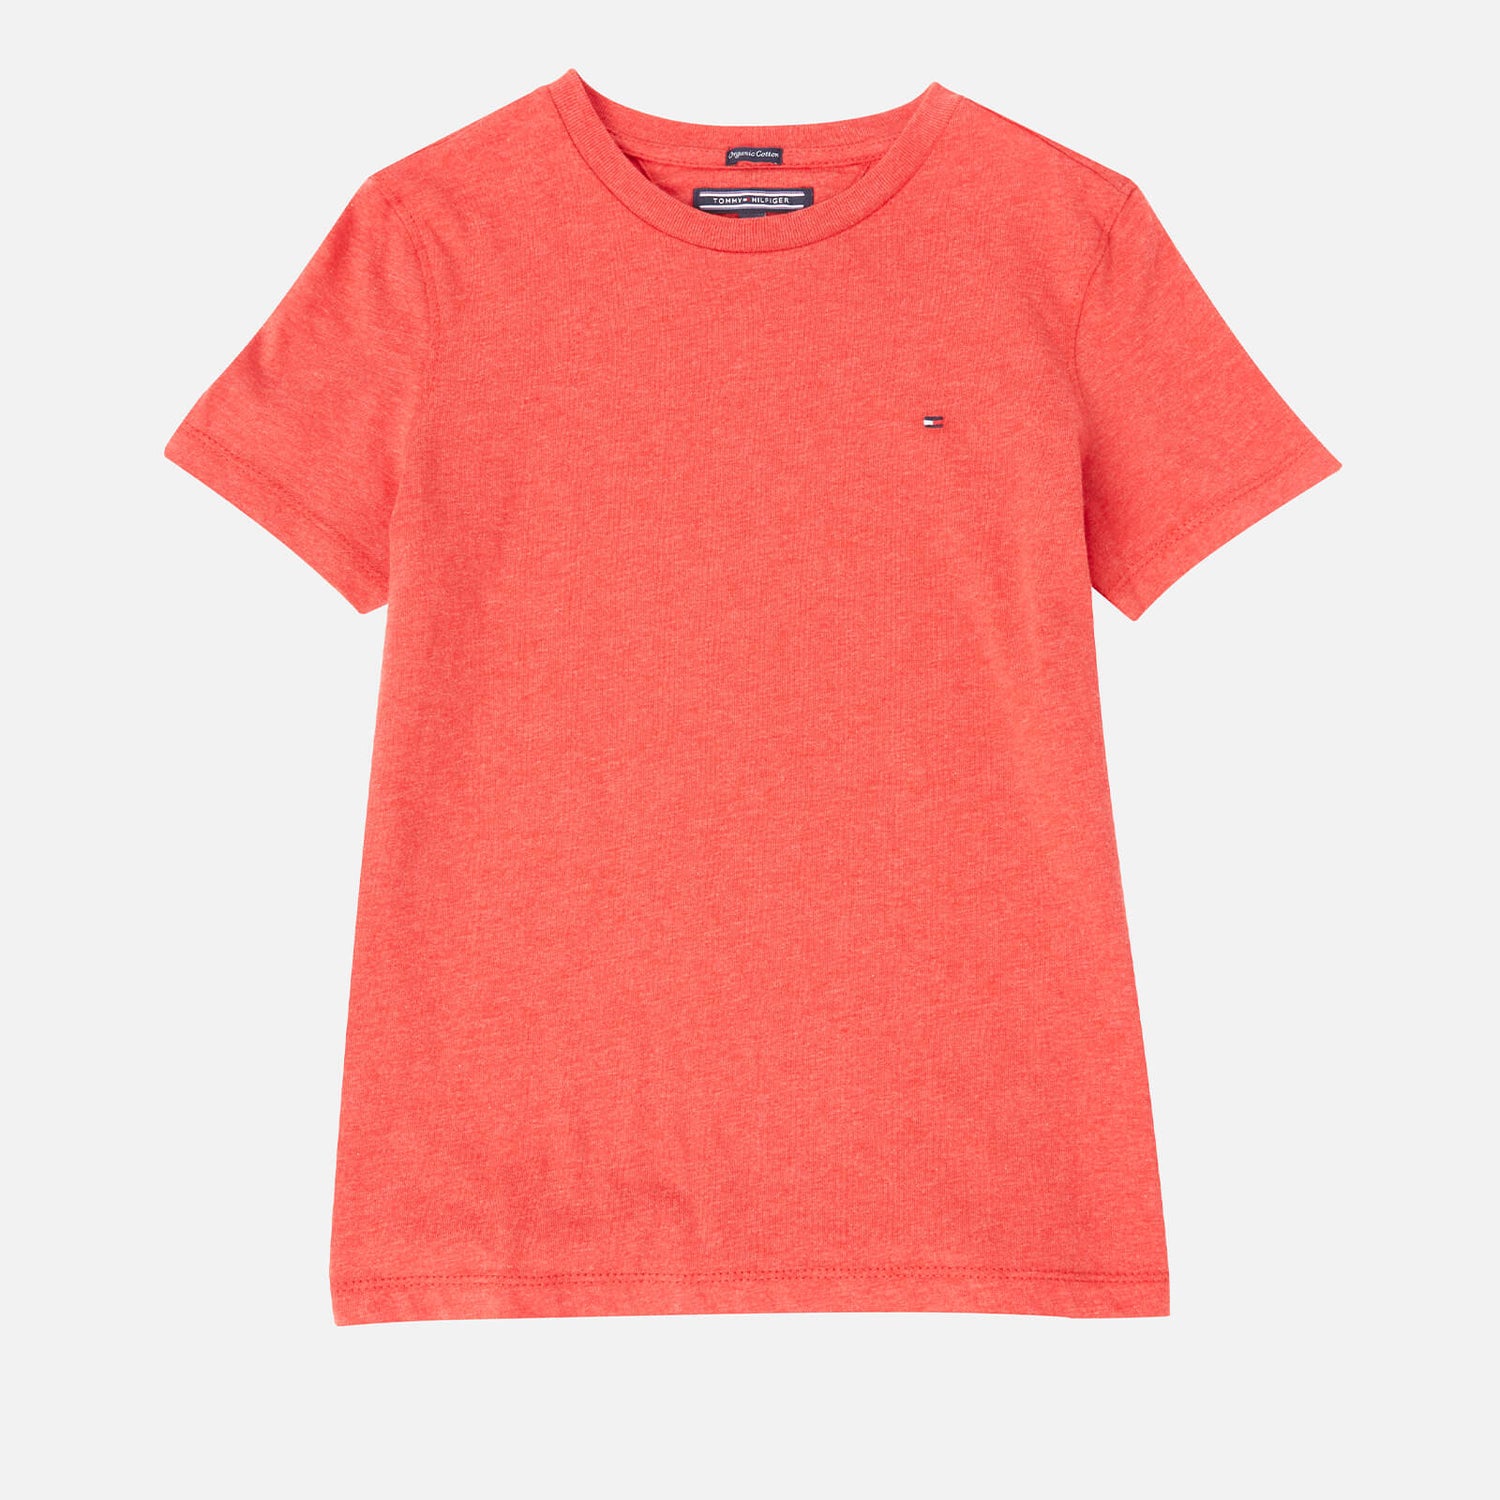 Tommy Hilfiger Boys' Basic Short Sleeve T-Shirt - Apple Red Heather - 14 Years